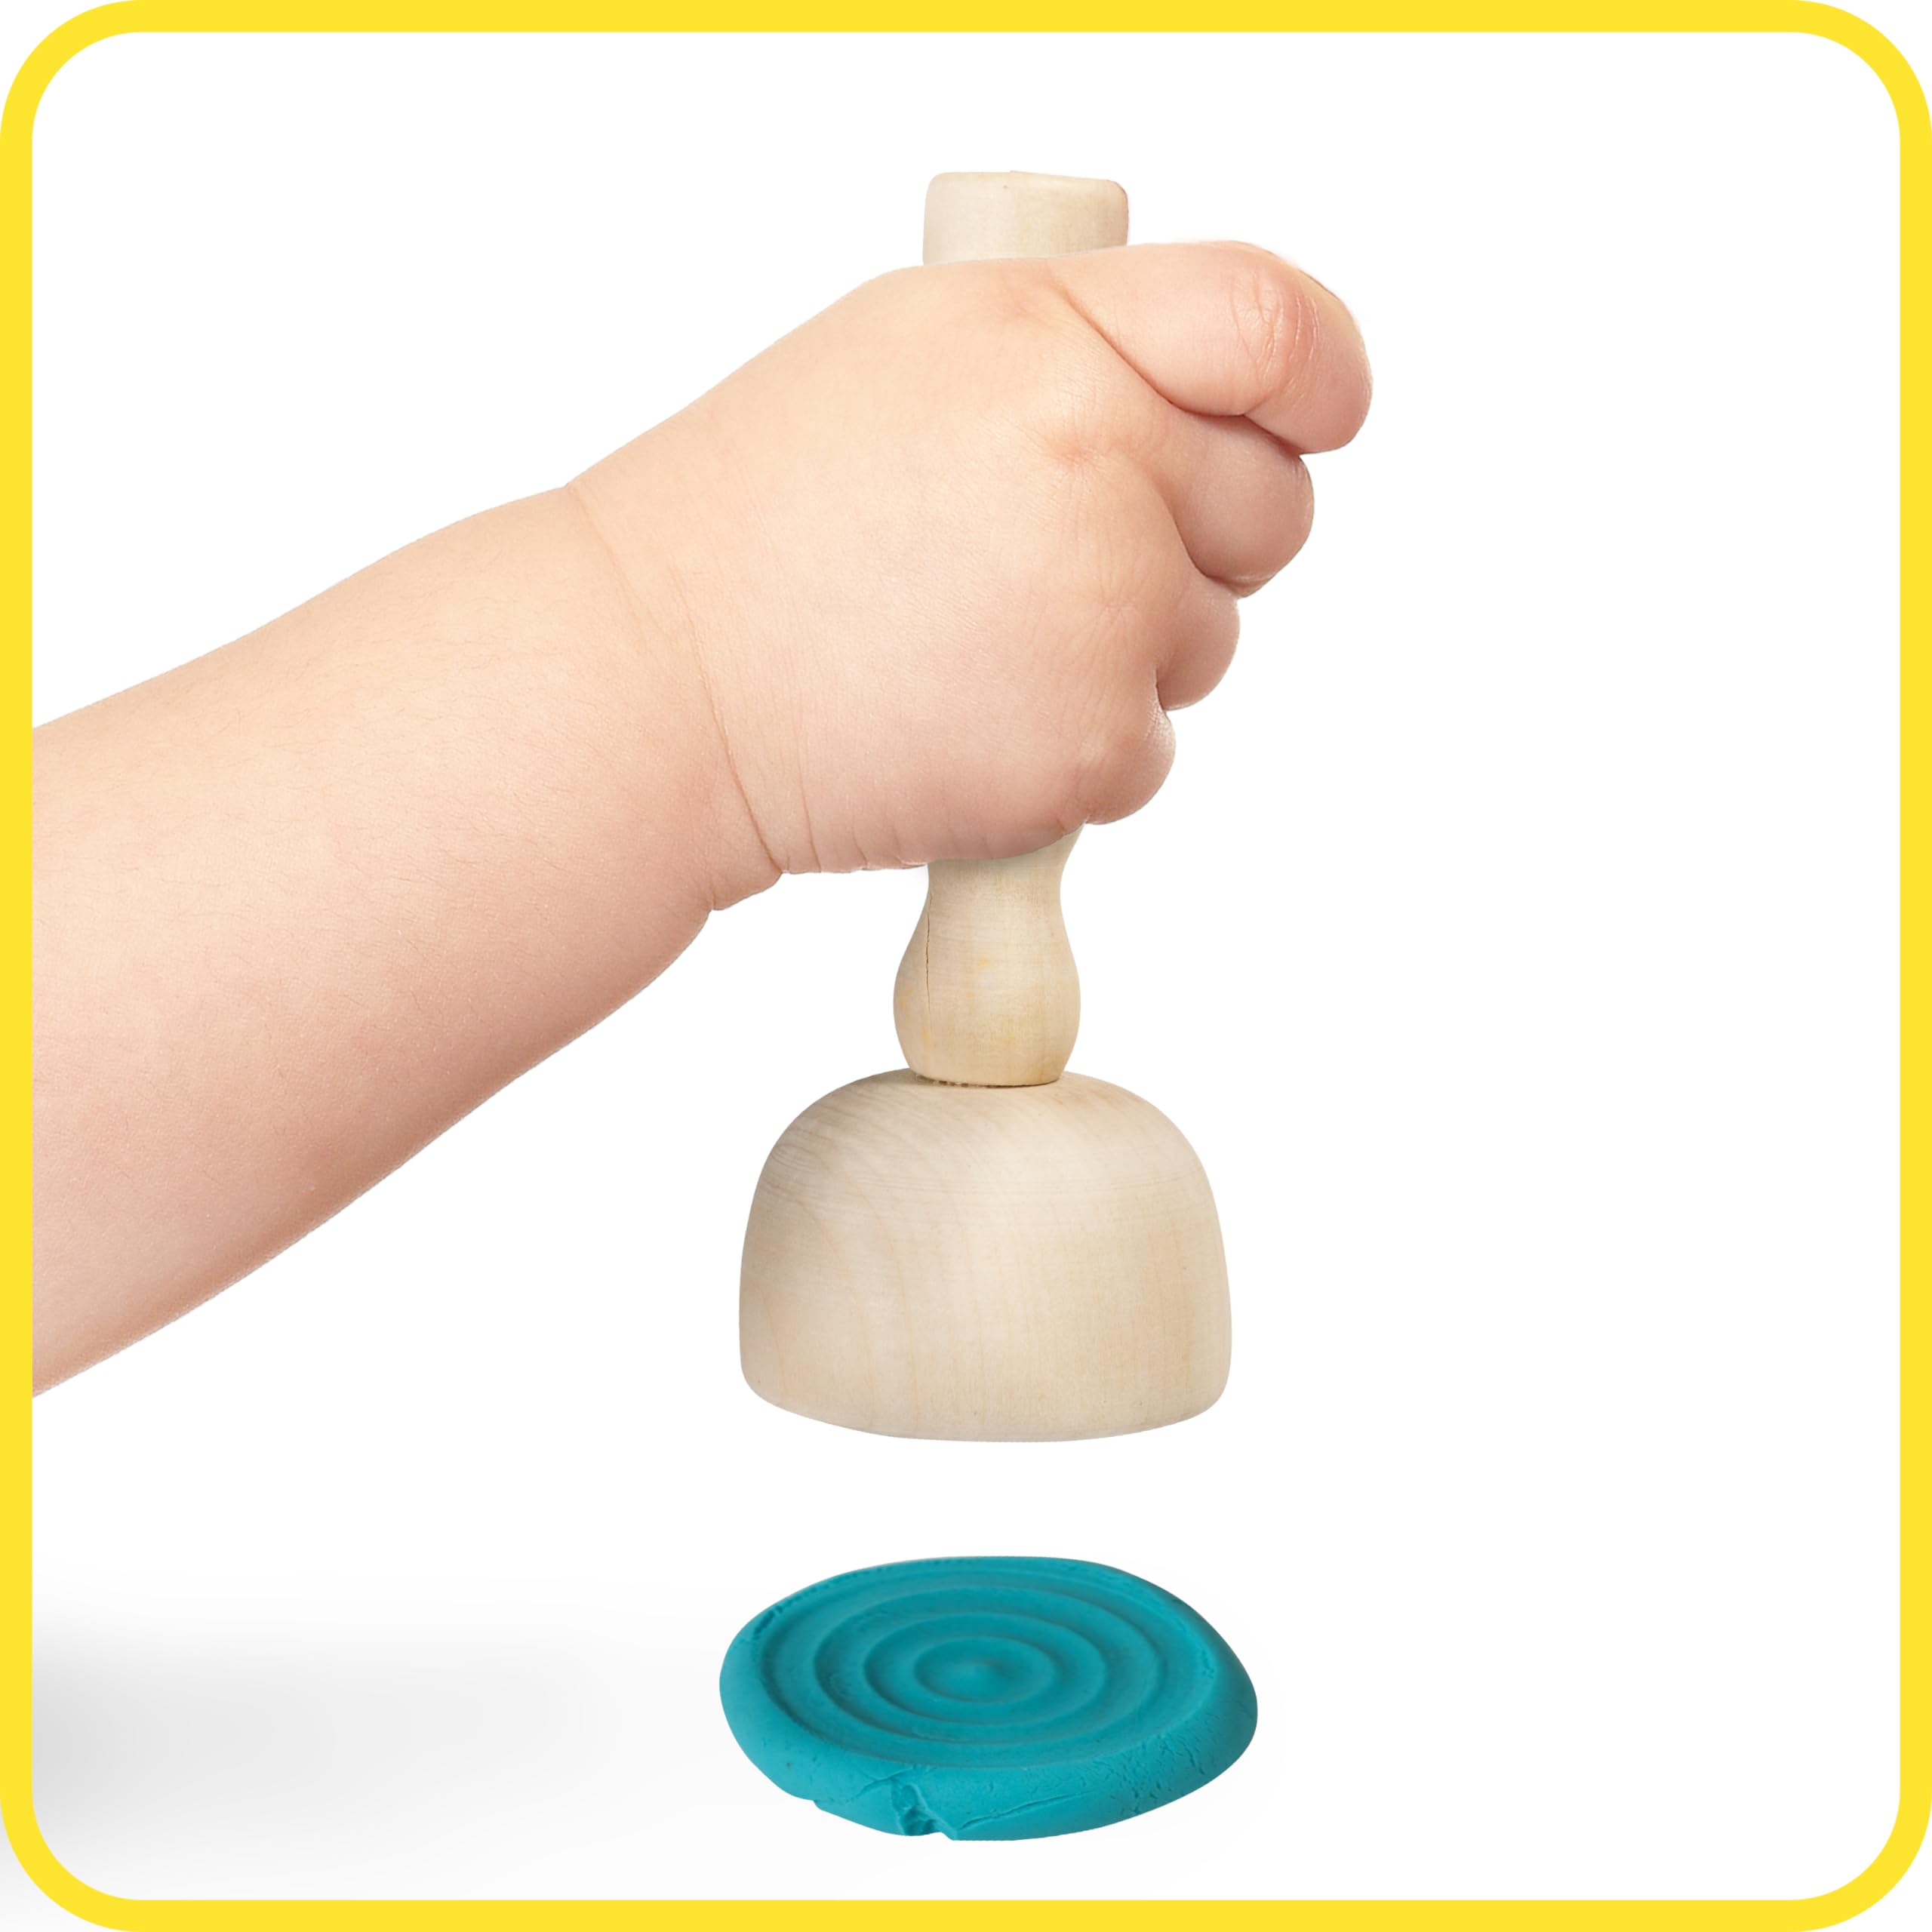 READY 2 LEARN Wooden Dough Stampers - Set of 4 - Kids Playdough, Clay, Pottery Texture Tools